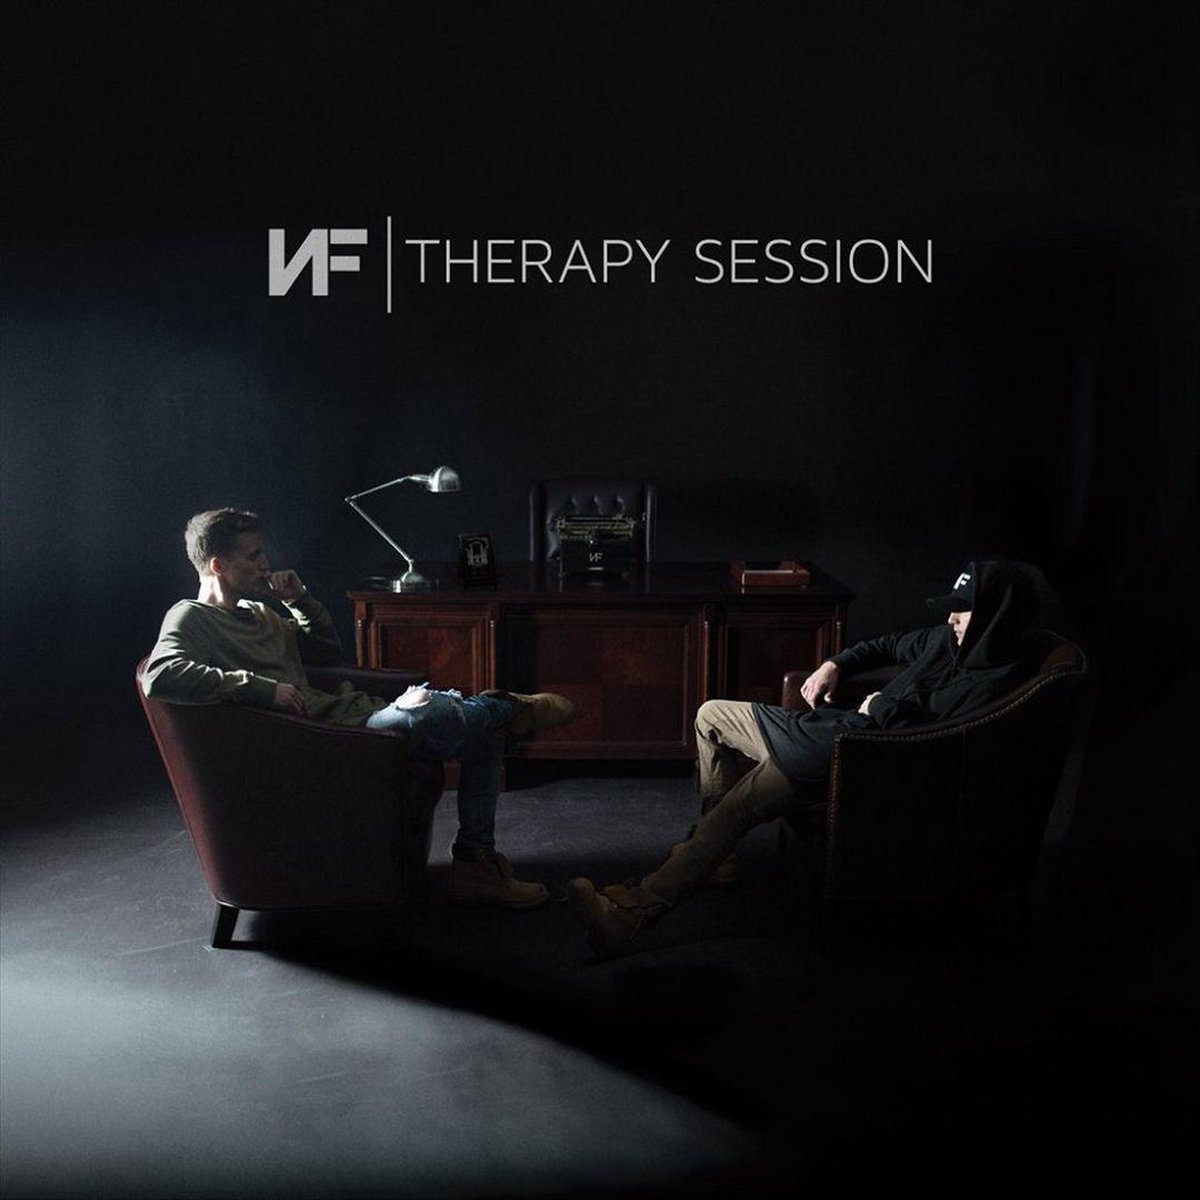 nf therapy session album zip free download